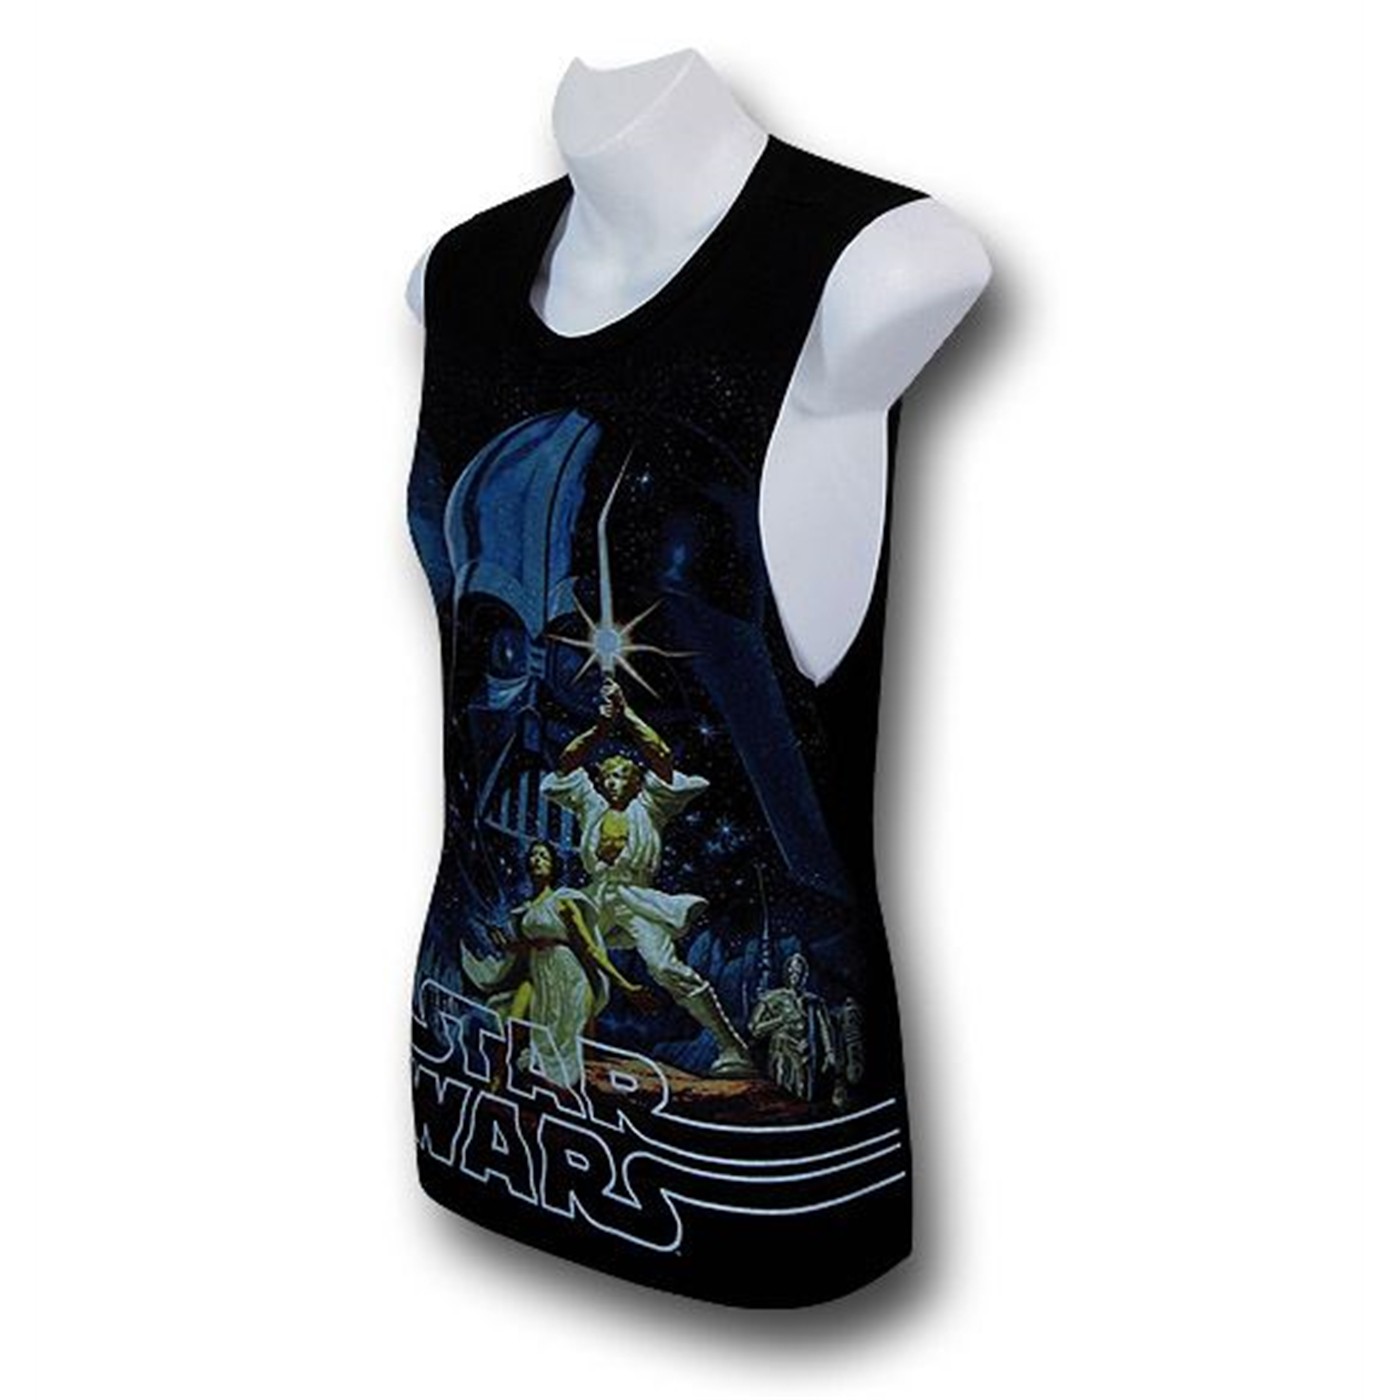 Star Wars Poster Women's Cut-Out Tank Top